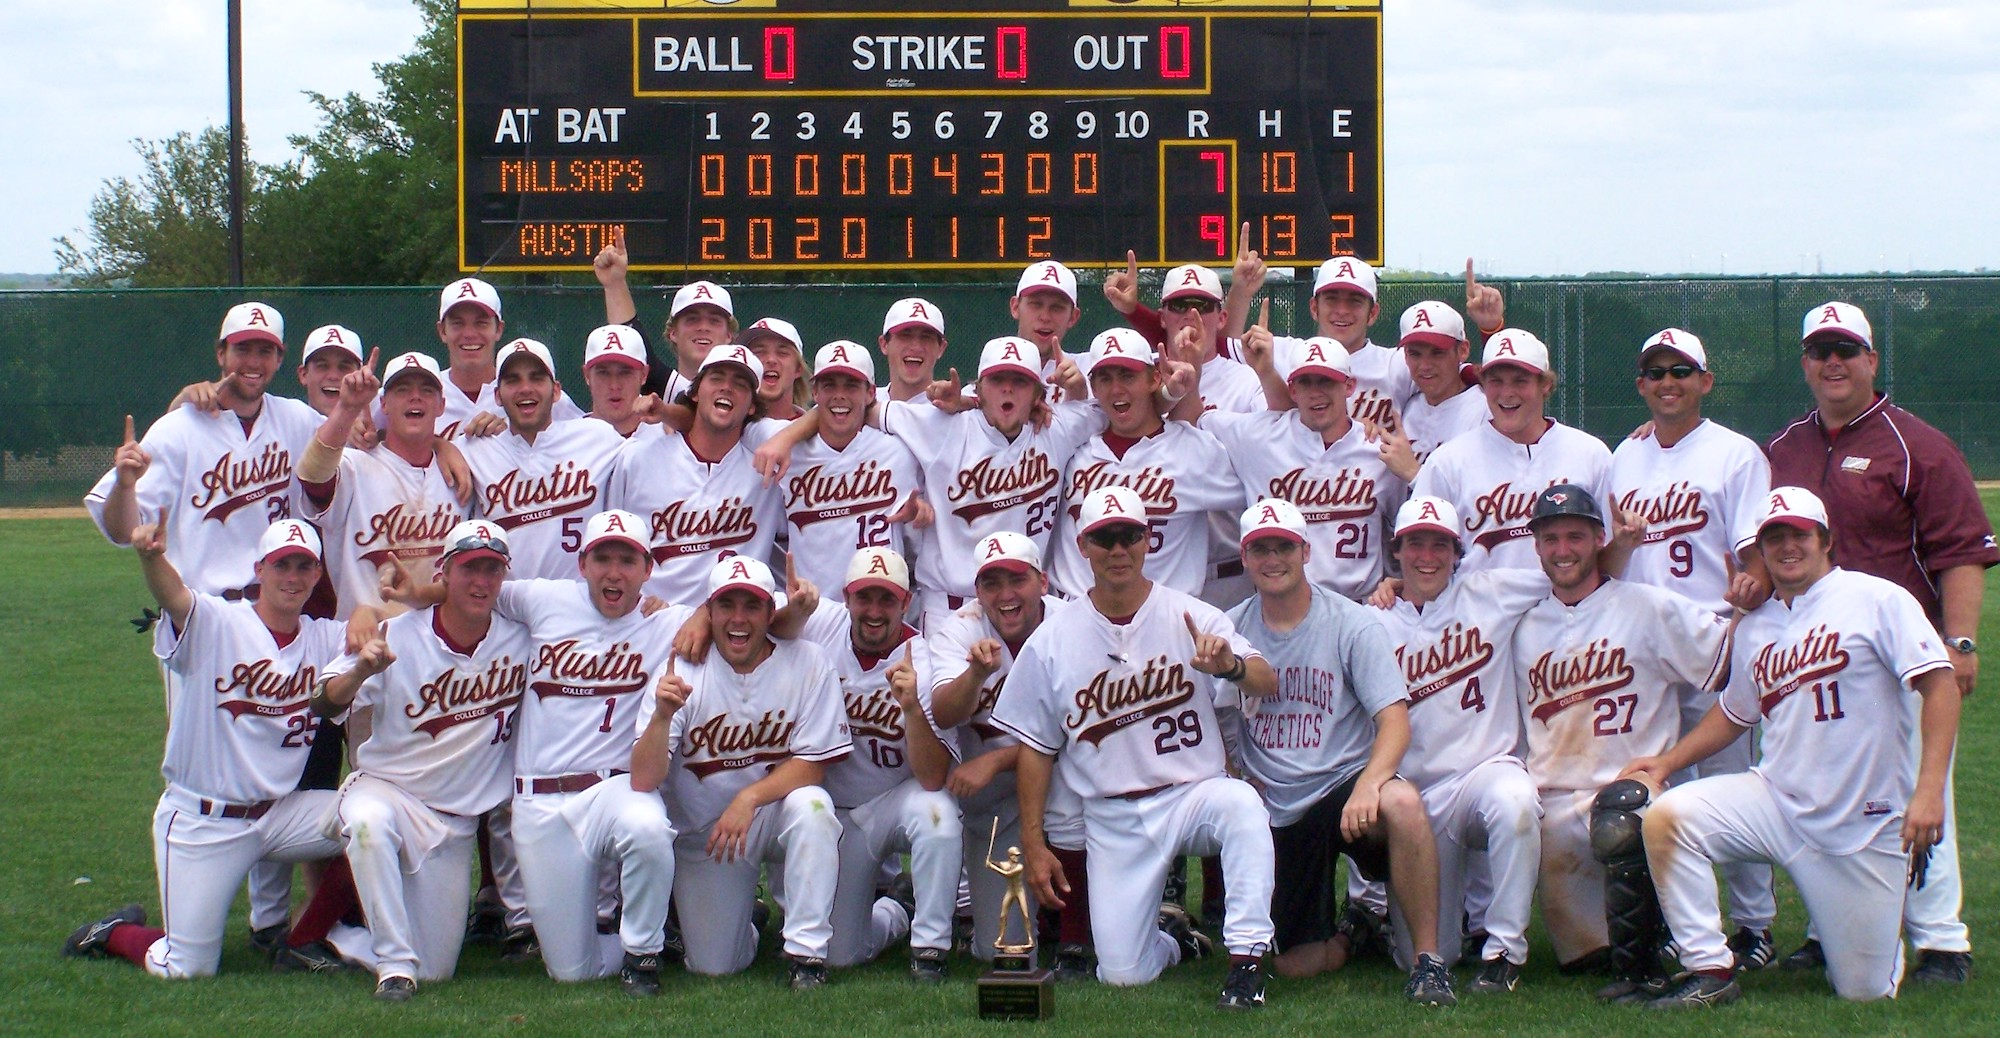 Celebrate Homecoming and the 2007 Baseball SCAC Championship Team!